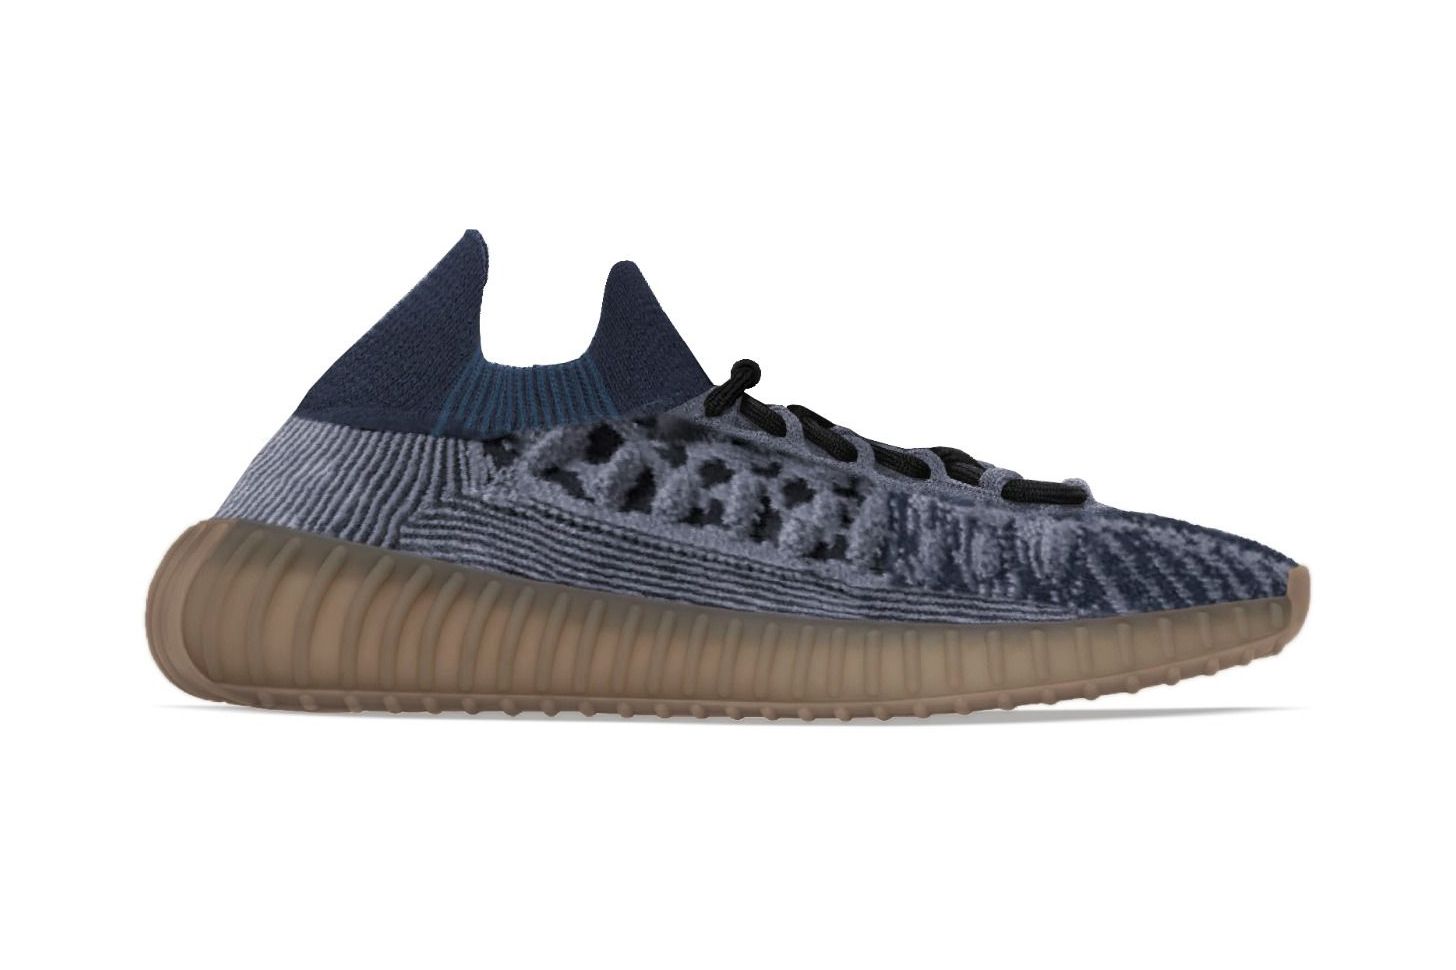 adidas Have Debuted New Yeezy BOOST 350 V2 CMPCT Silhouette - Sneaker Freaker